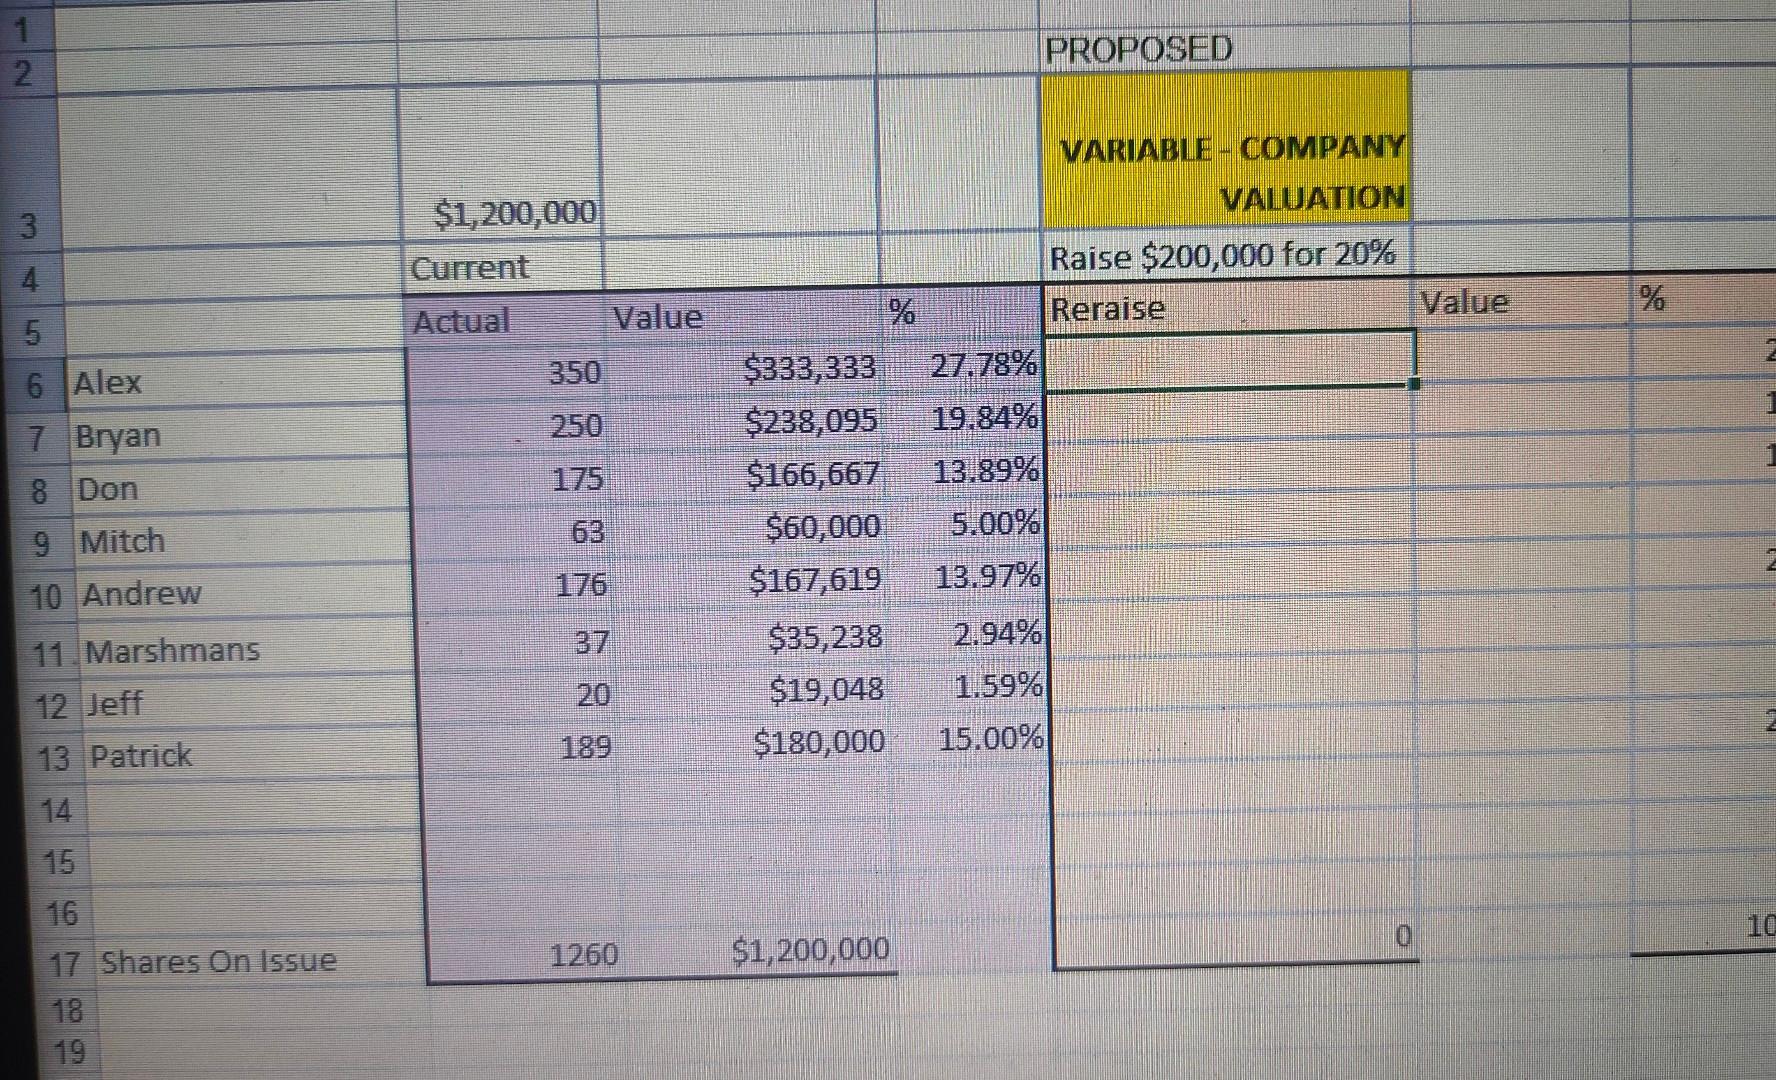 1 2 PROPOSED VARIABLE - COMPANY VALUATION $1,200,000 3 Current Raise $200,000 for 20% Reraise Value Actual Value 5 350 6 Alex